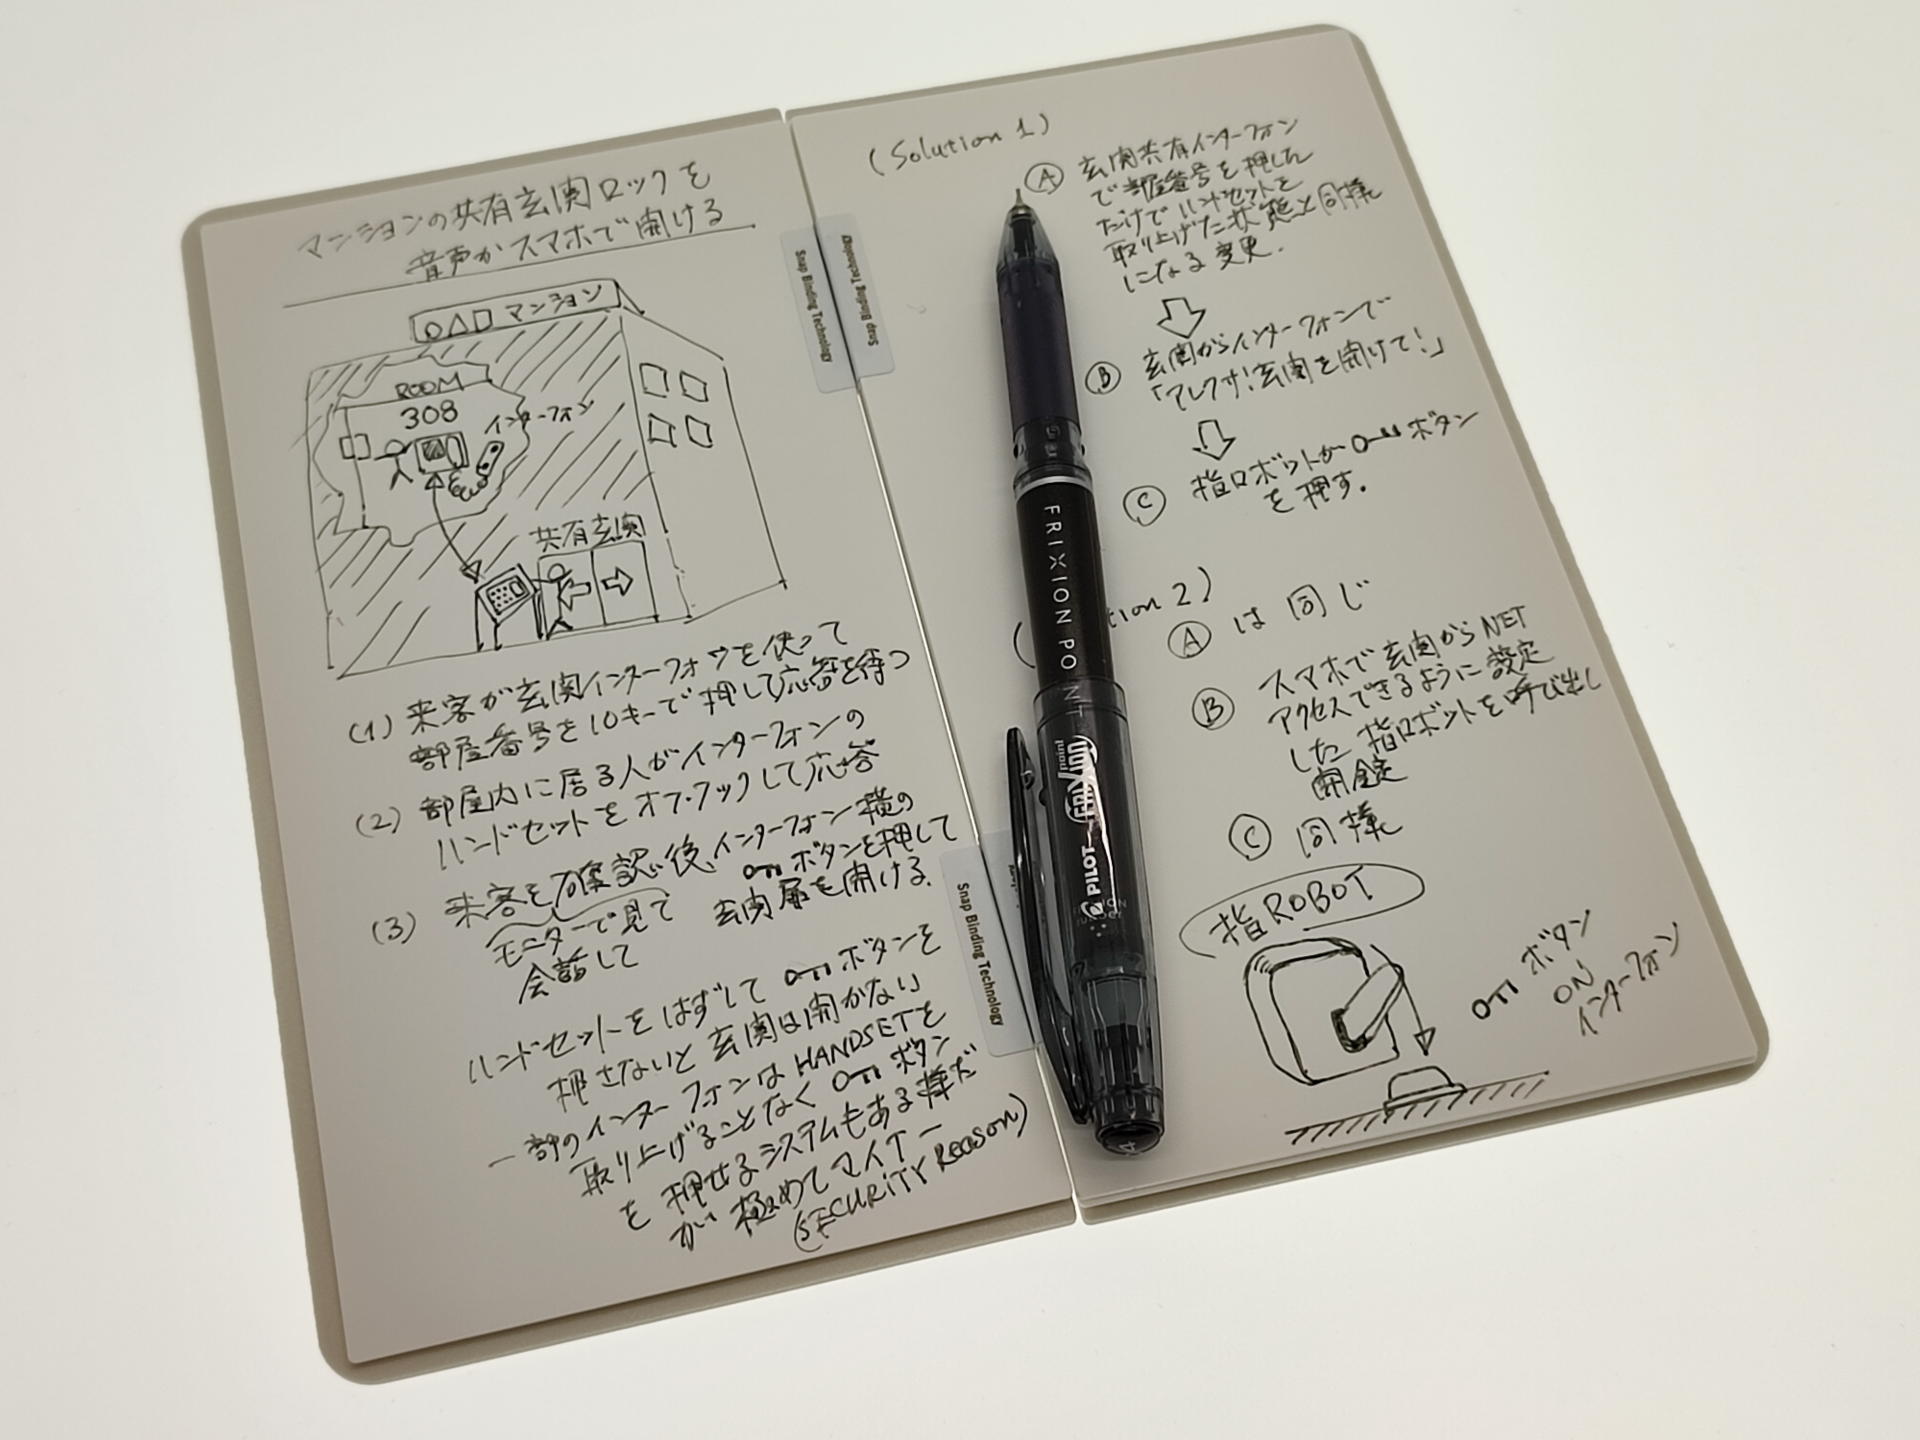 BUTTERFLY BOARD Notes」っていう令和のホワイトボードを友人から頂い ...